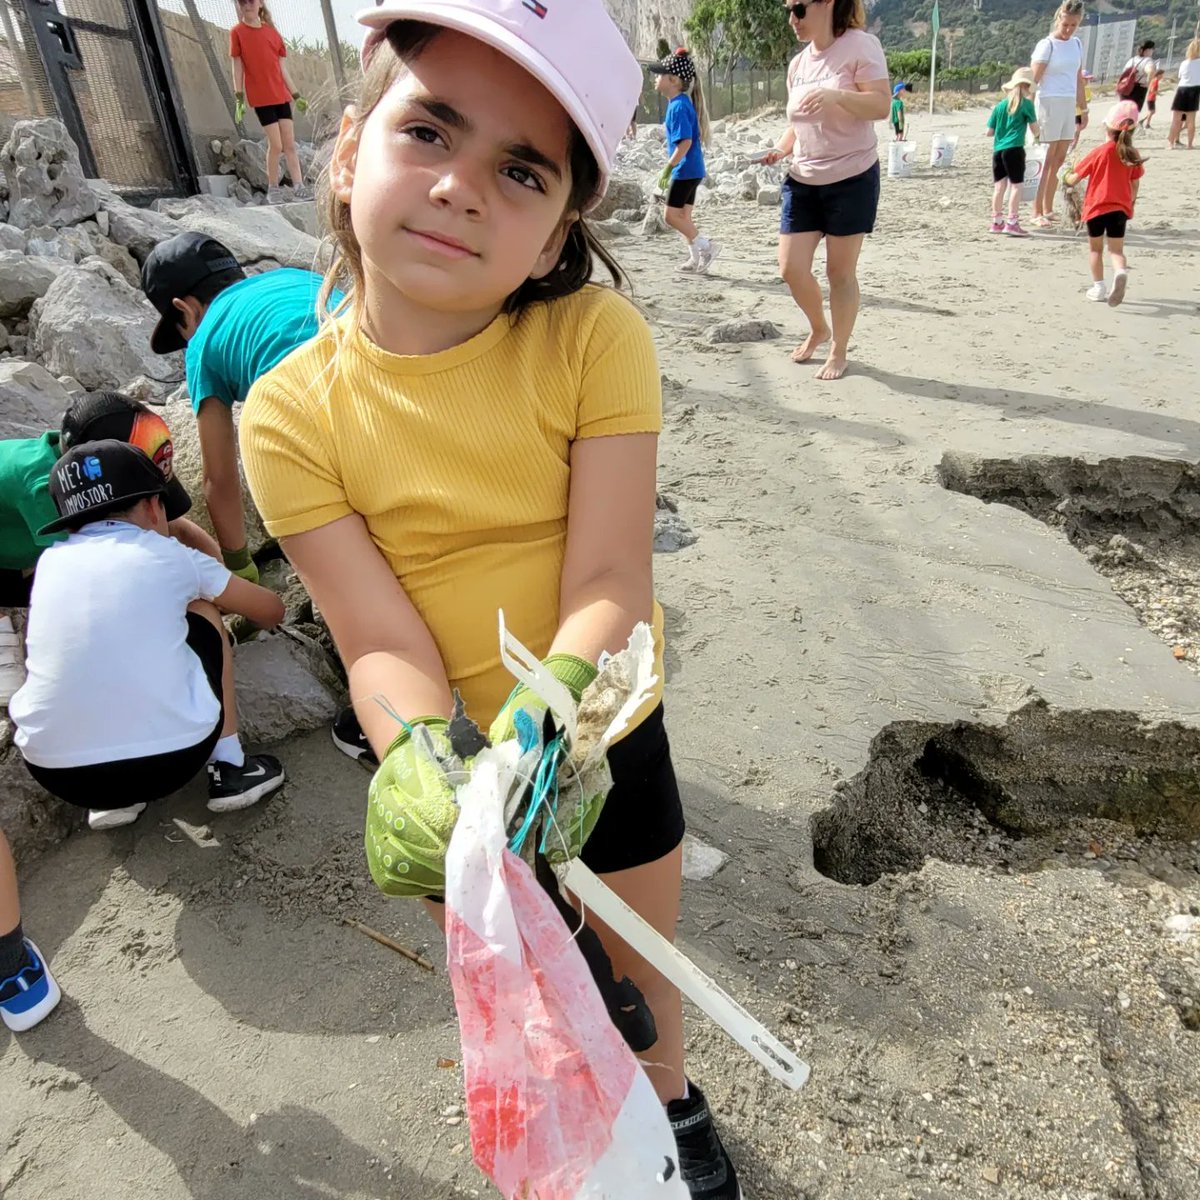 The 87th #GreatGibraltarBeachClean Yes you read right, 87 #beachcleans & counting! The children from Governor's Meadow were rearing to go with their snazzy octopus gloves, and my did they do a fantastic job #Gibraltar @seashepherd @BlueOceanStrtgy @whales_org @Gallifrey001